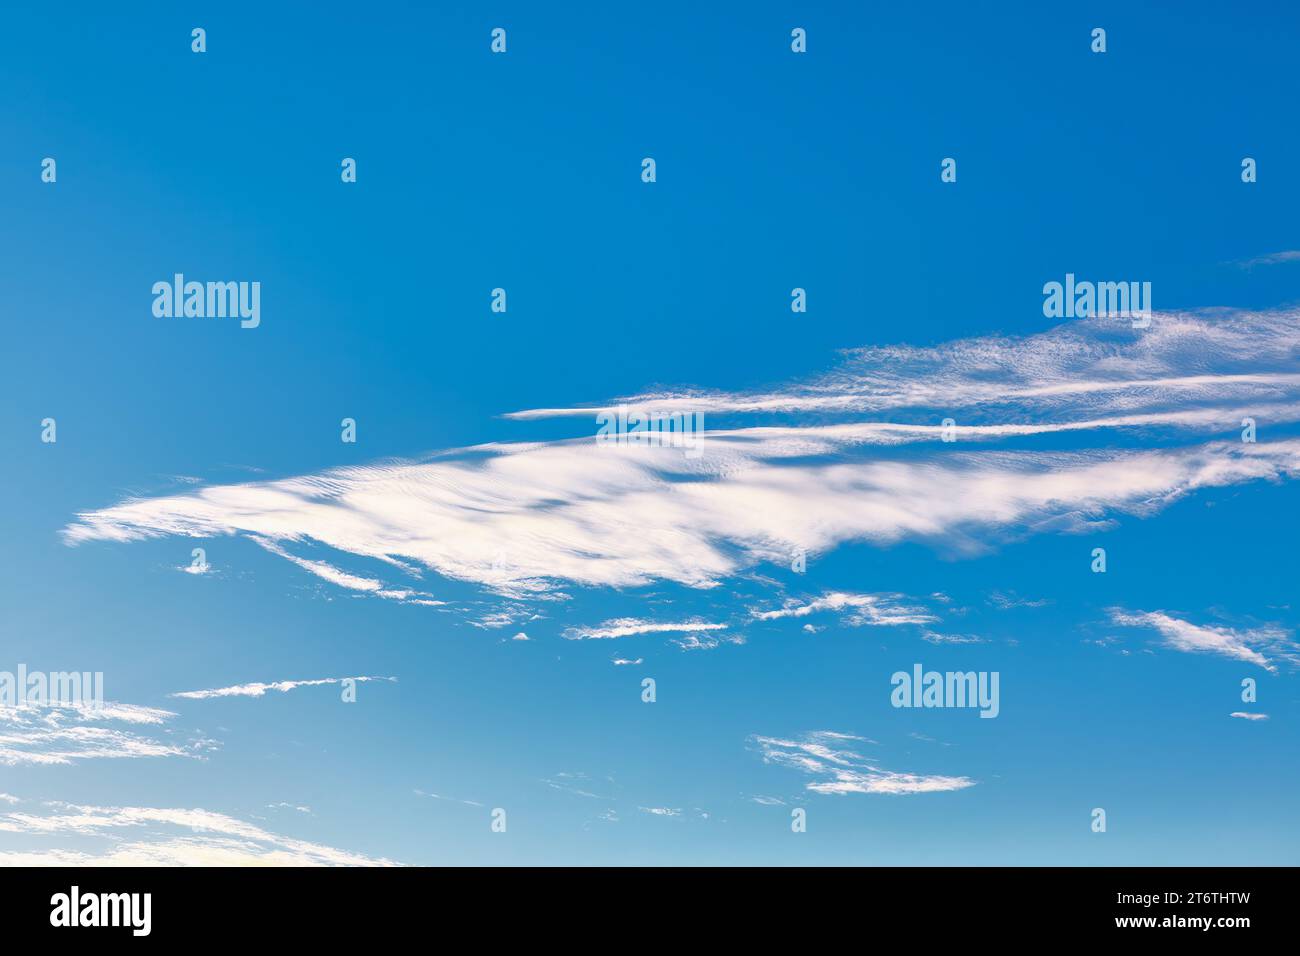 Blue sky adorned with gentle, wispy white clouds . Blue hue is deep and calming, creating a sense of openness and tranquility Stock Photo